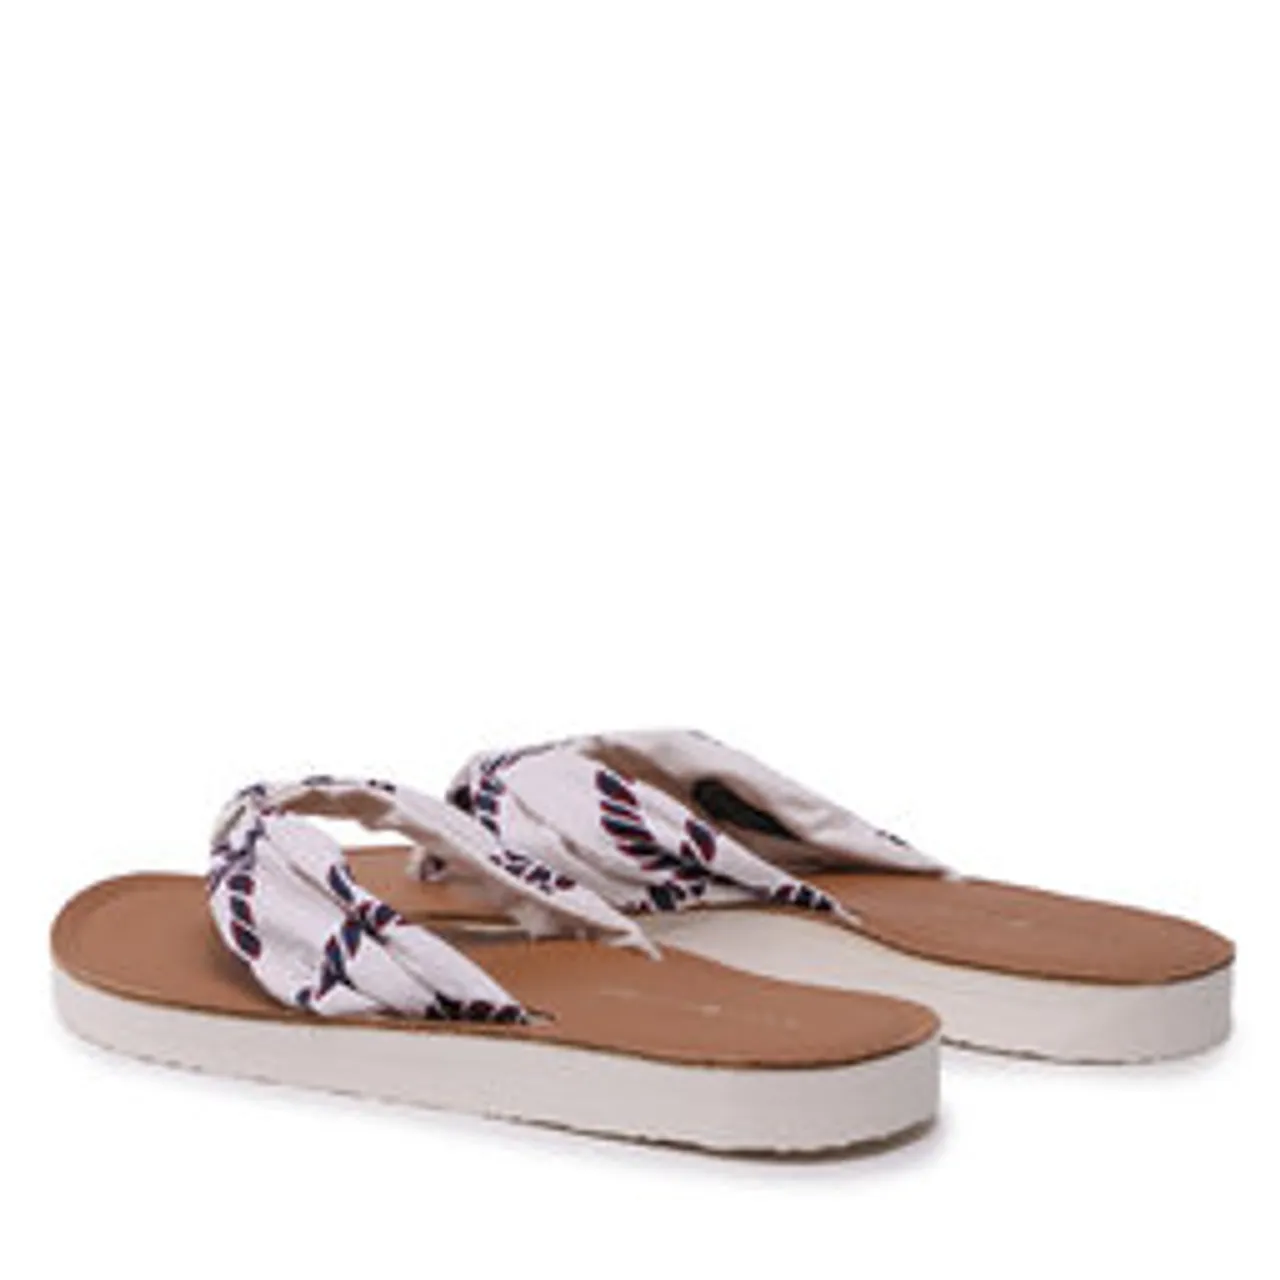 Zehentrenner Tommy Hilfiger Th Elevated Beach Sandal Print FW0FW07164 Weatheared White AC0